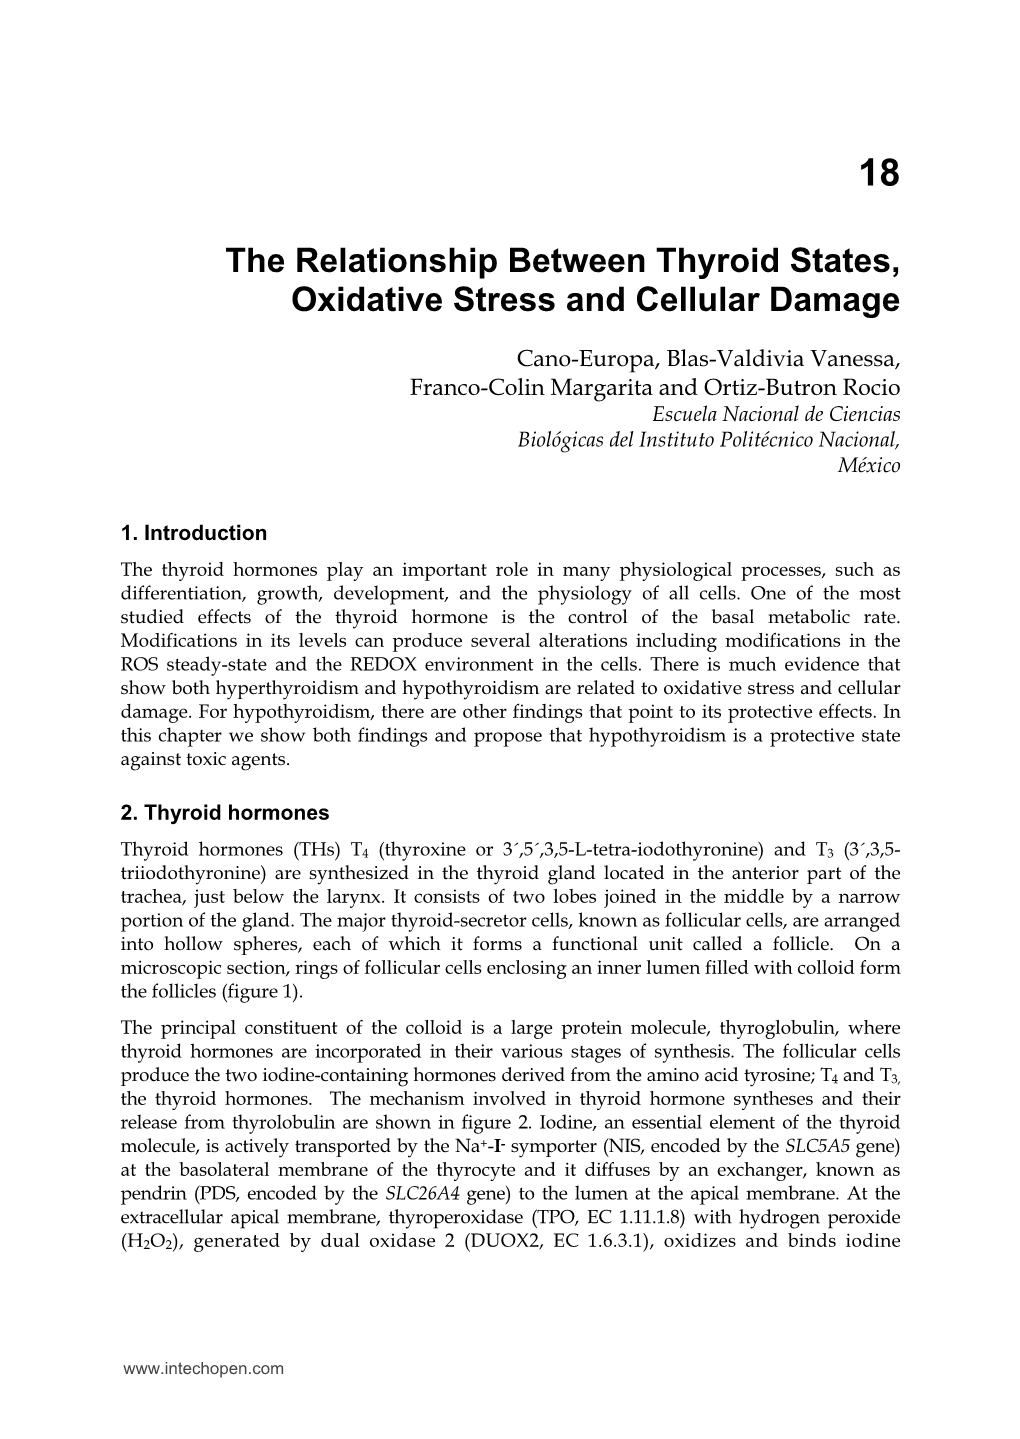 The Relationship Between Thyroid States, Oxidative Stress and Cellular Damage